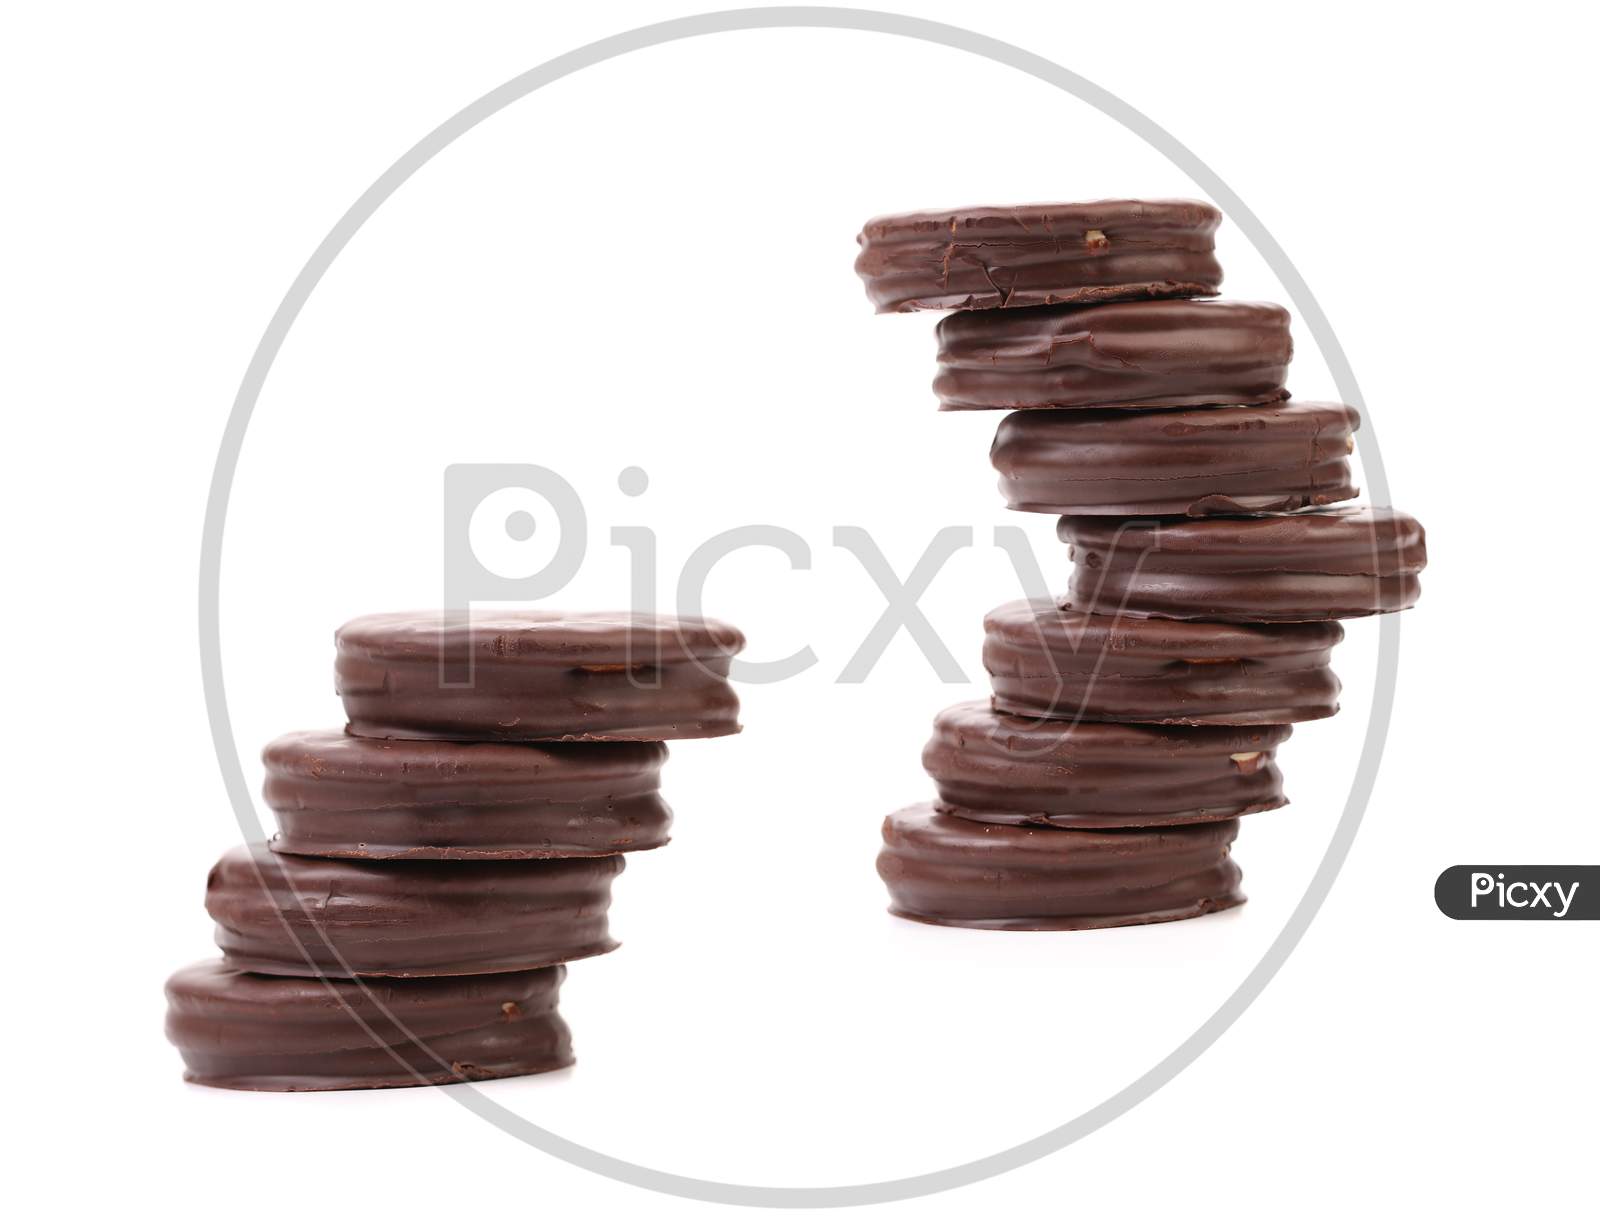 Two Stacks Of Round Chocolate Biscuit. Isolated On A White Background.